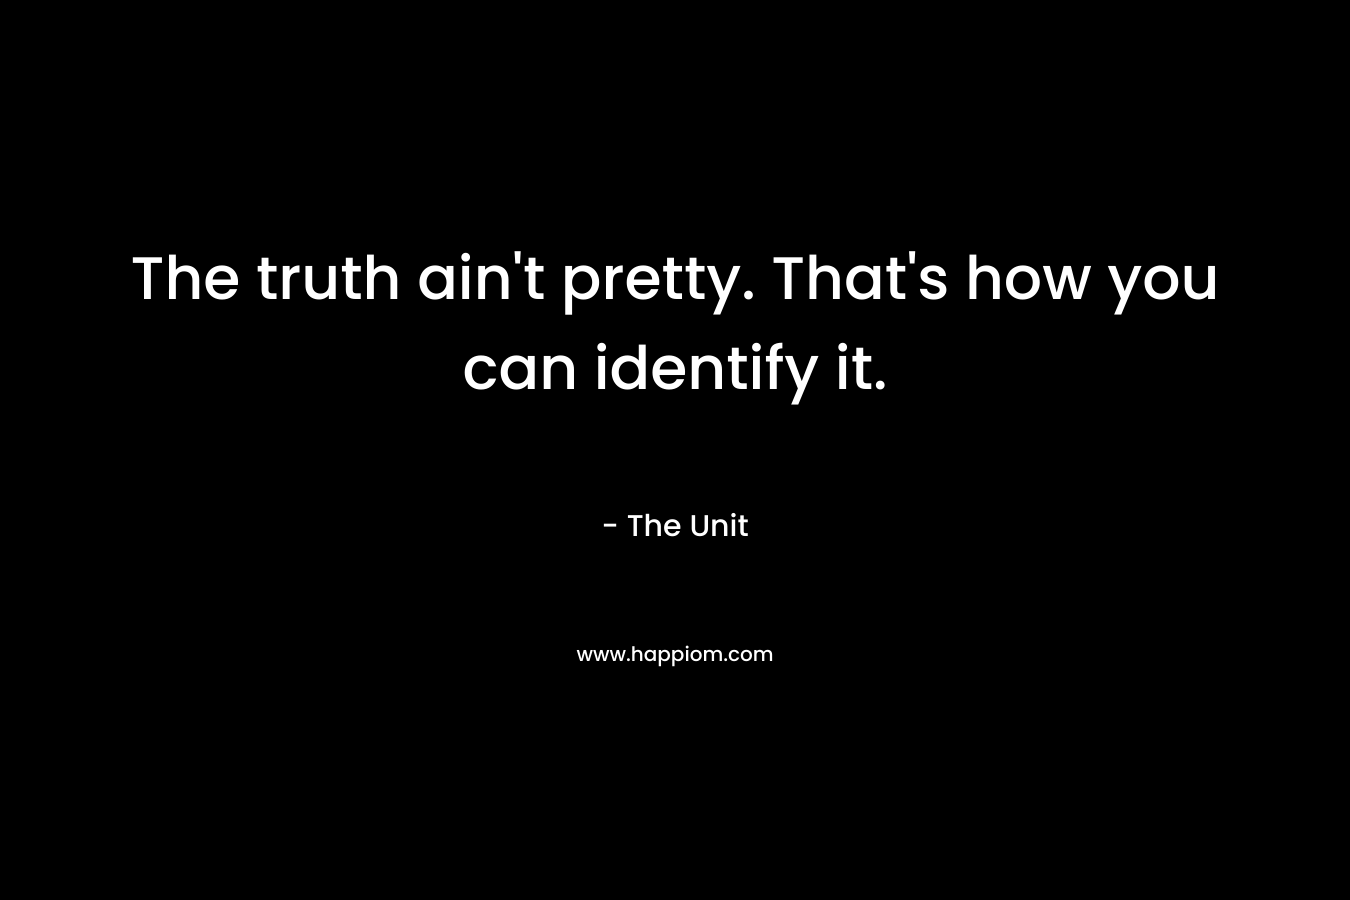 The truth ain’t pretty. That’s how you can identify it. – The Unit